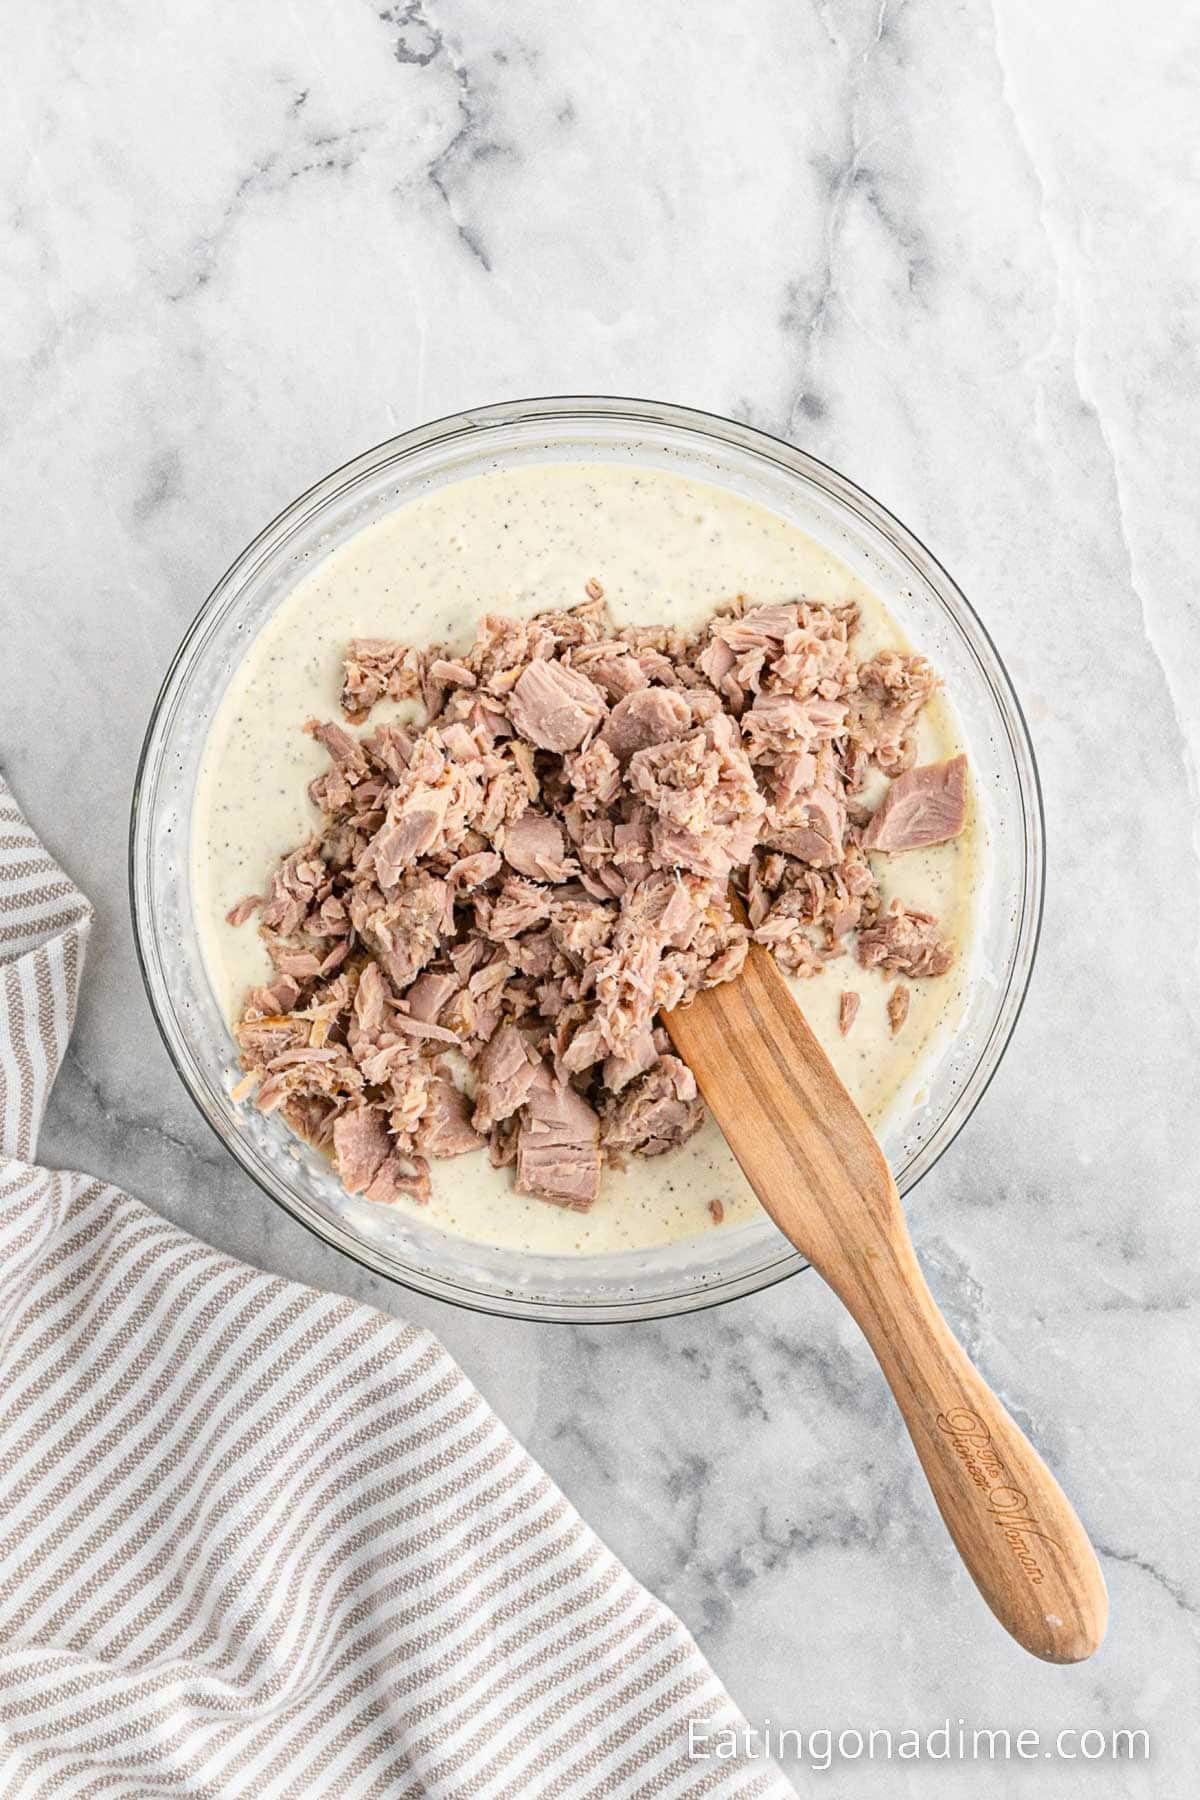 Mixing in the chopped tuna in the dressing mixture with a wooden spoon